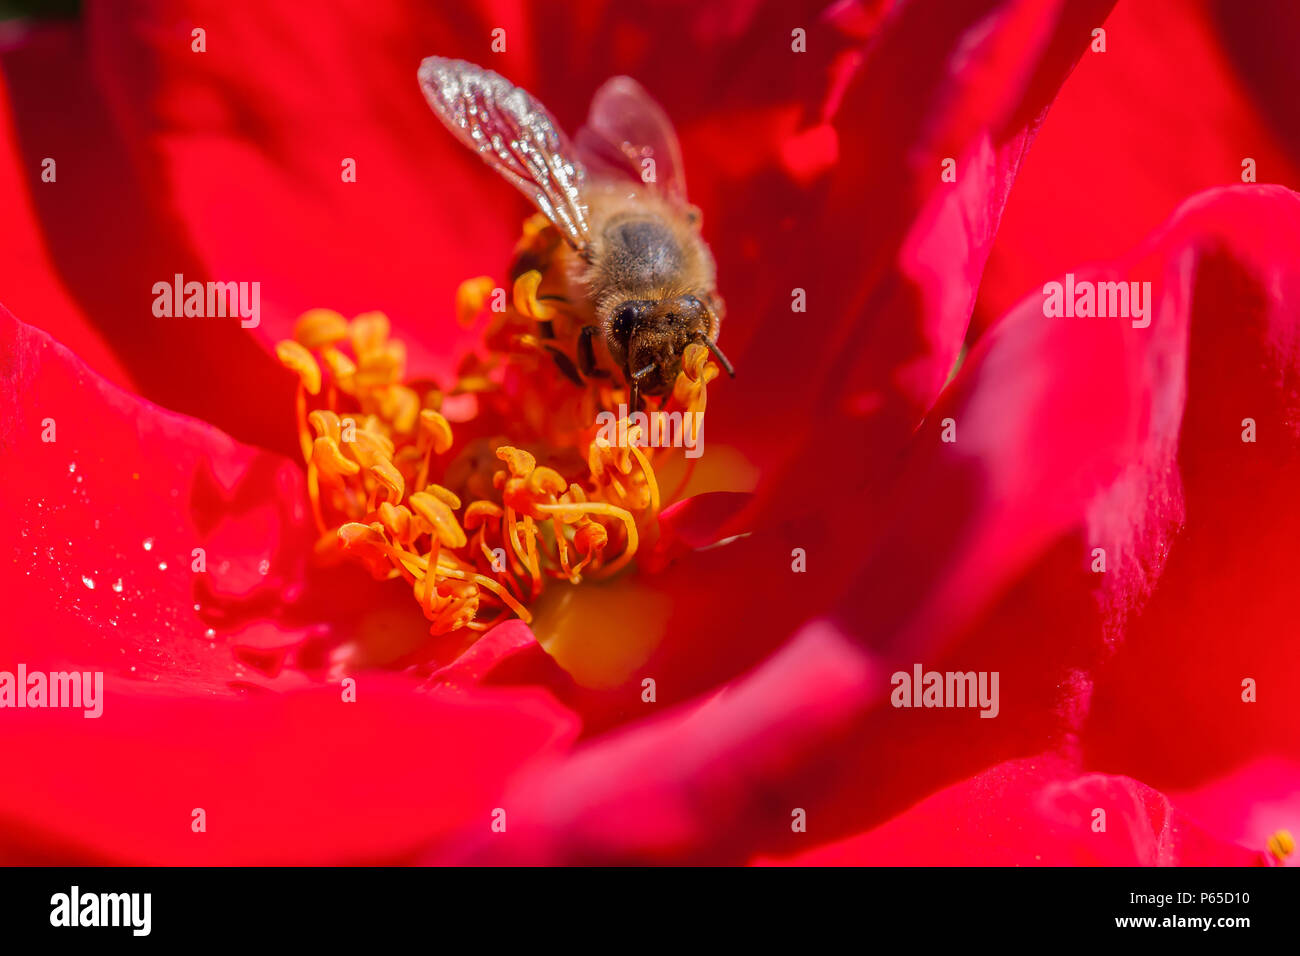 Honey bee (Apis mellifera)  was foraging for nectar on a red Home Run rose, San Jose Municipal Rose Garden, California, United States. Stock Photo